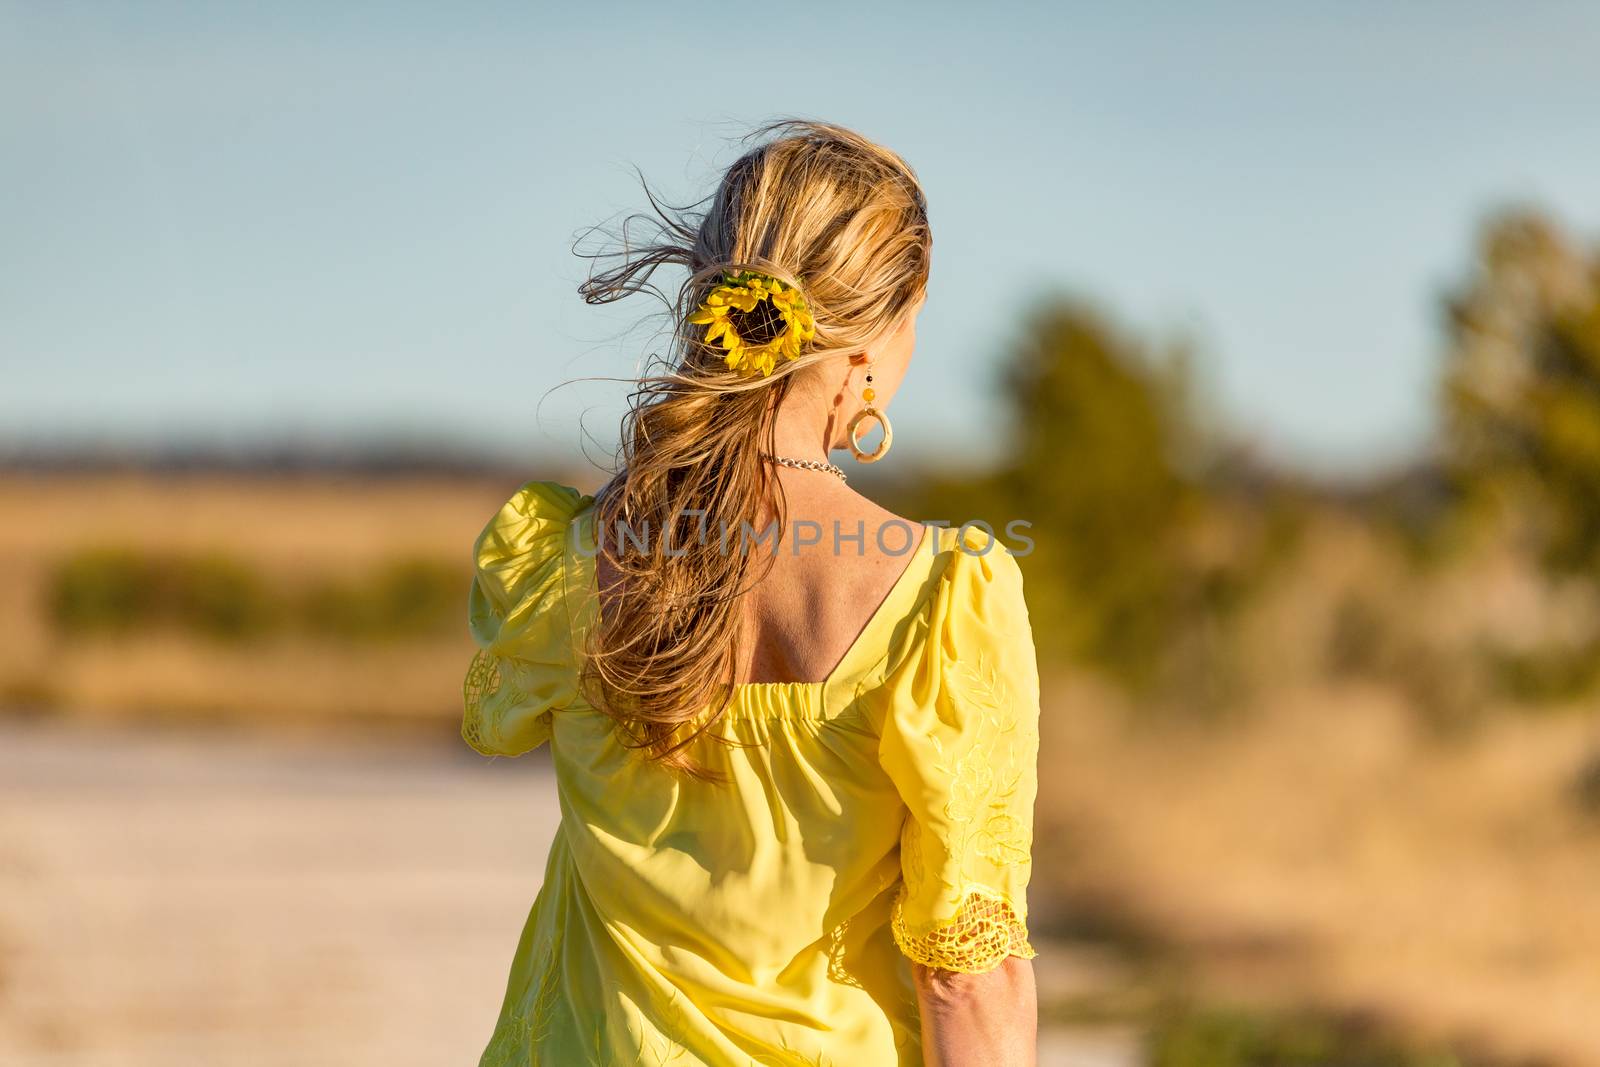 Woman outdoors in sunshine sunflower in her wavy hair by lovleah